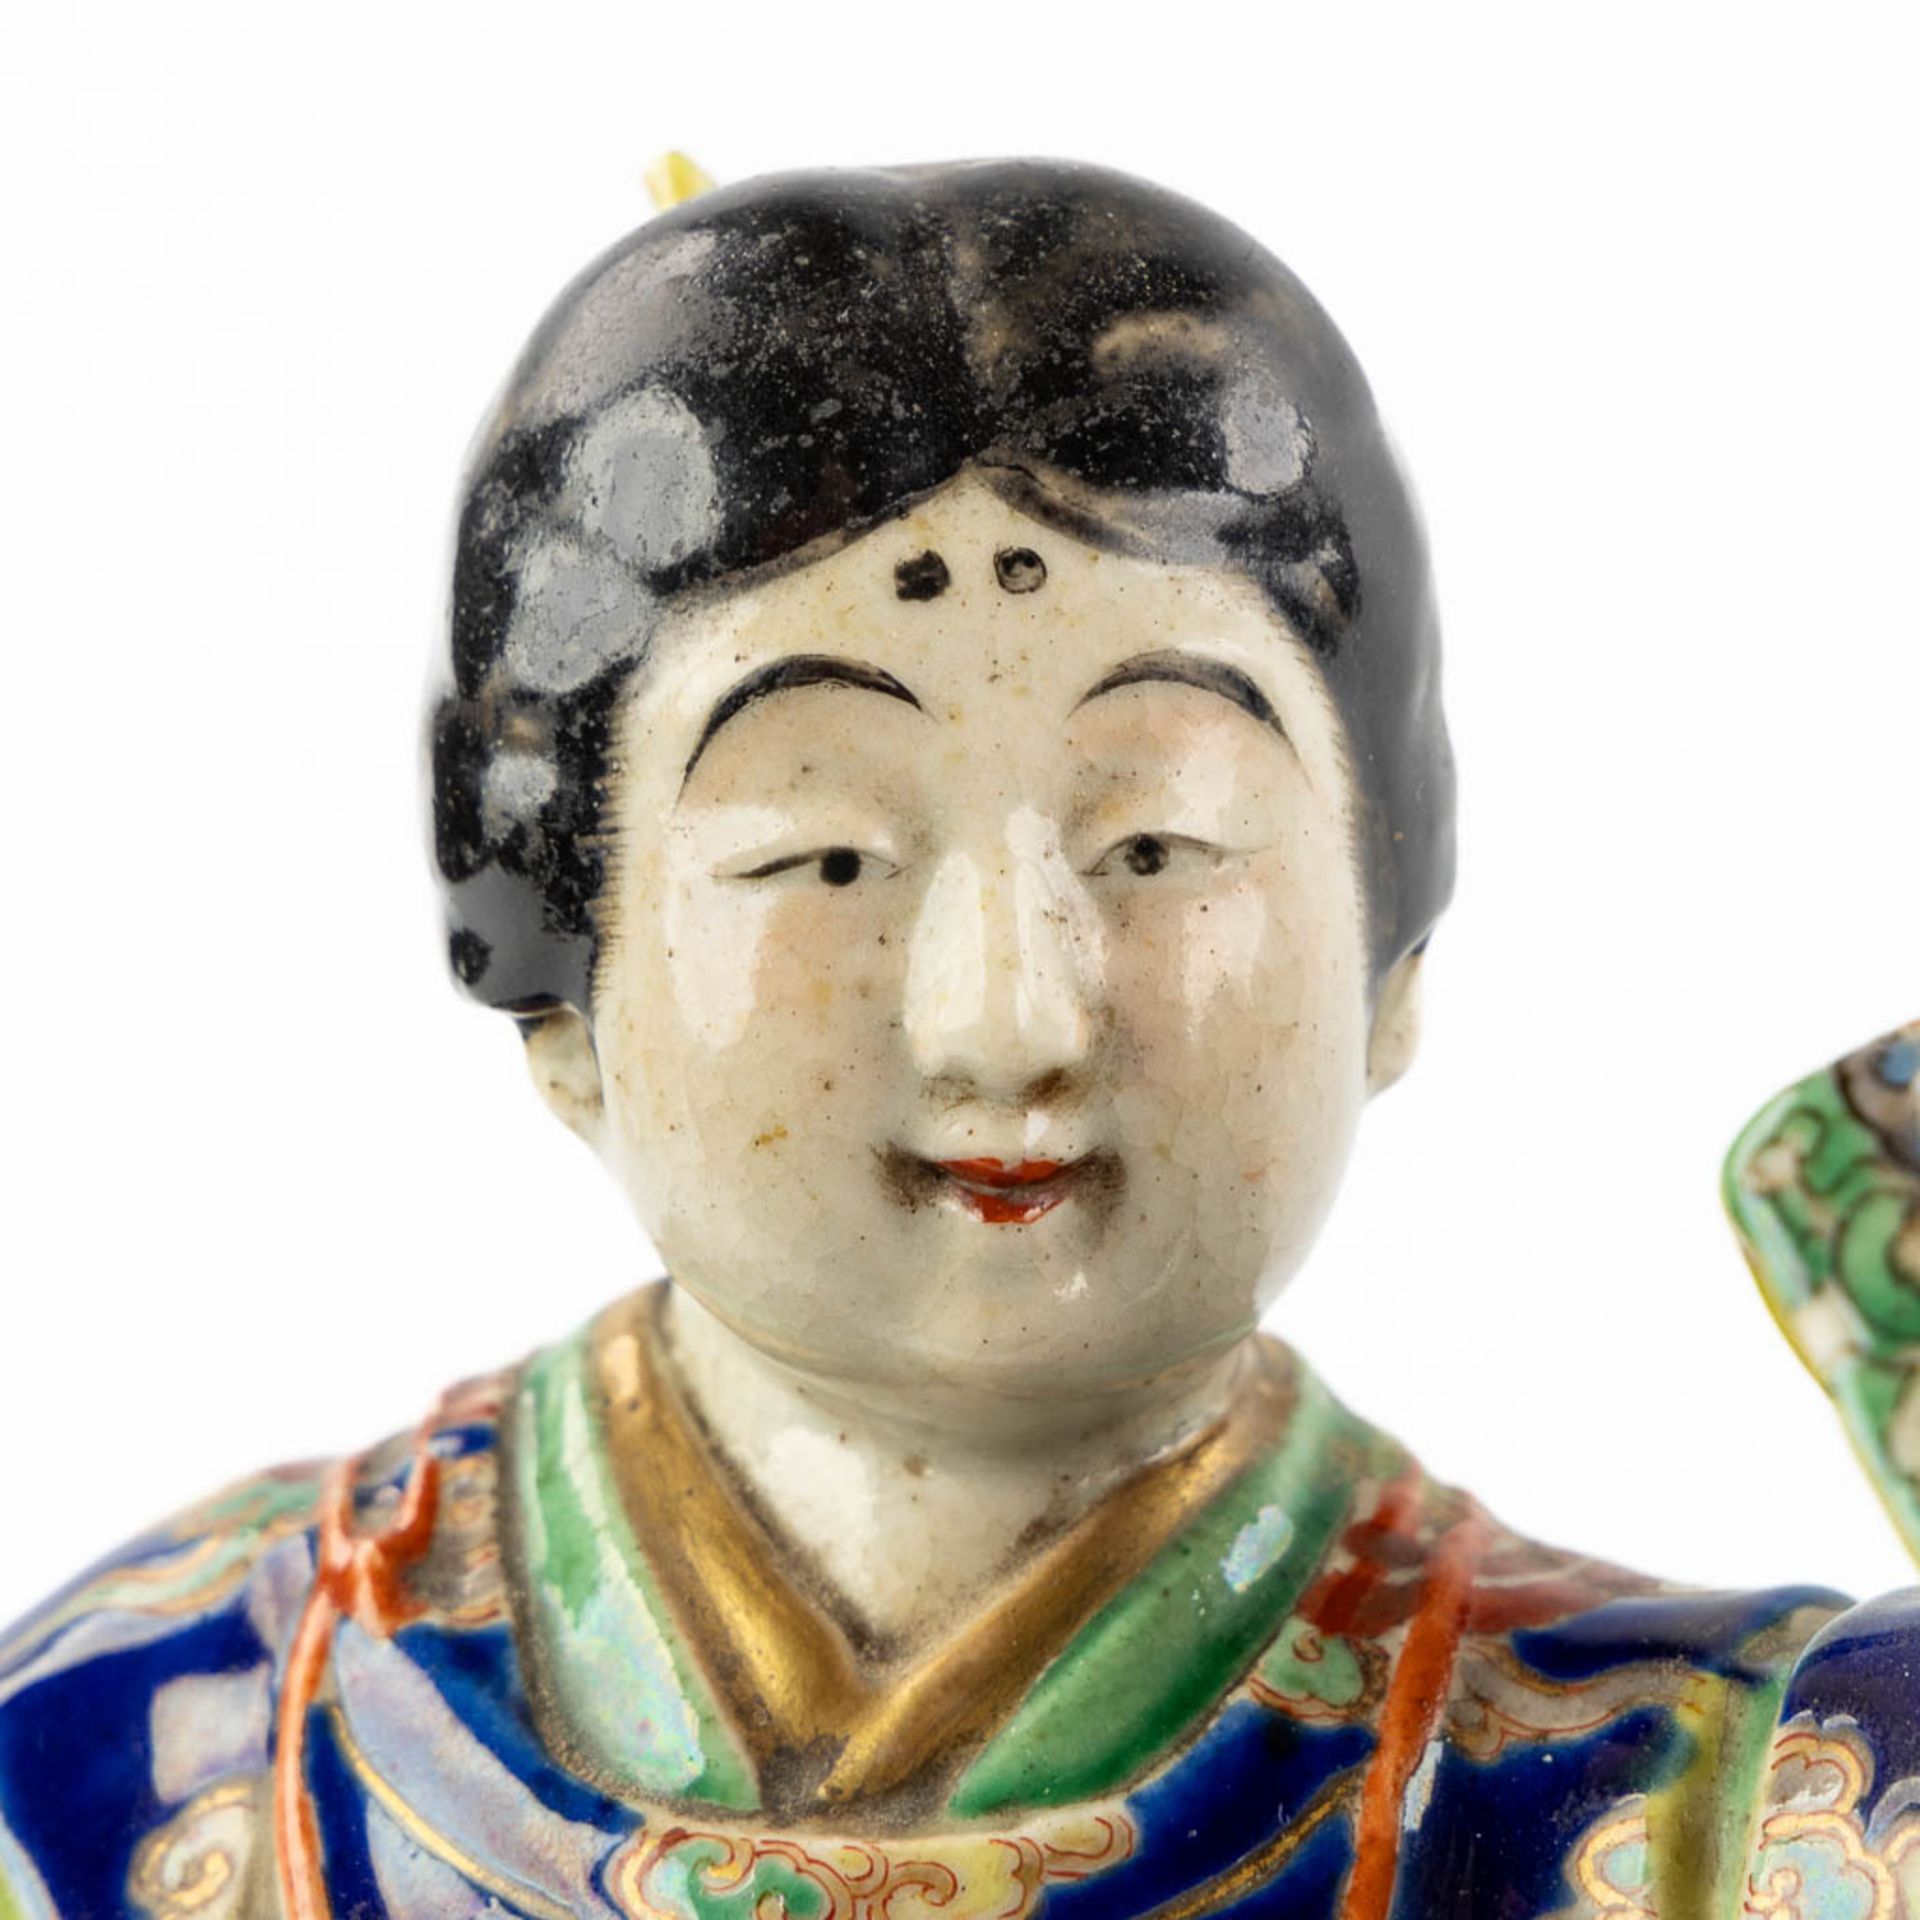 Two Japanese figurines, glazed stoneware. 19th/20th C. (L:14 x W:17 x H:32 cm) - Image 8 of 12